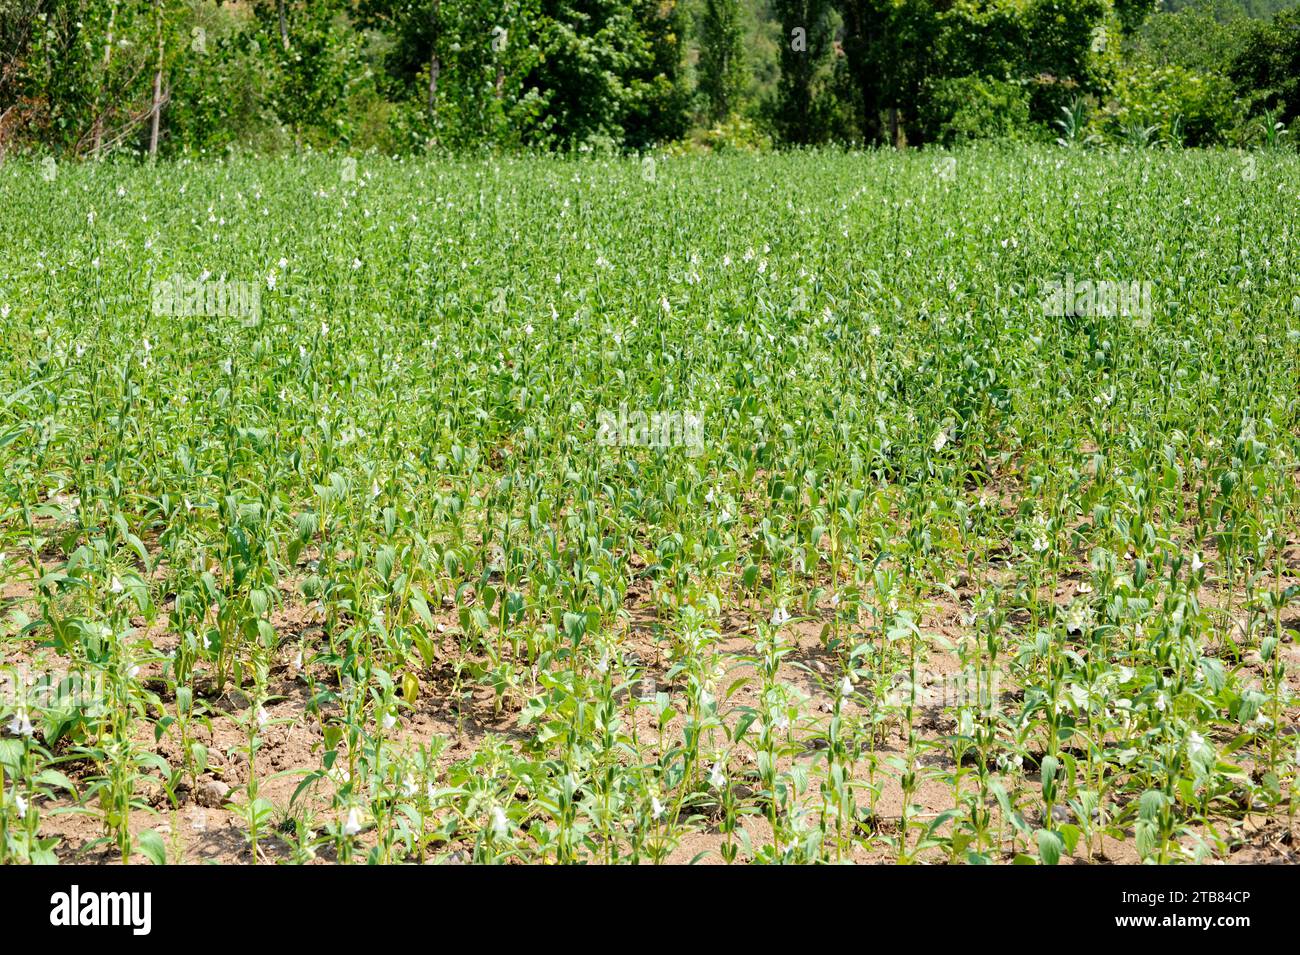 Sesame (Sesamum indicum) is an annual plant native to Africa but widely cultivated in others tropical regions for its edible seeds and oil. This photo Stock Photo